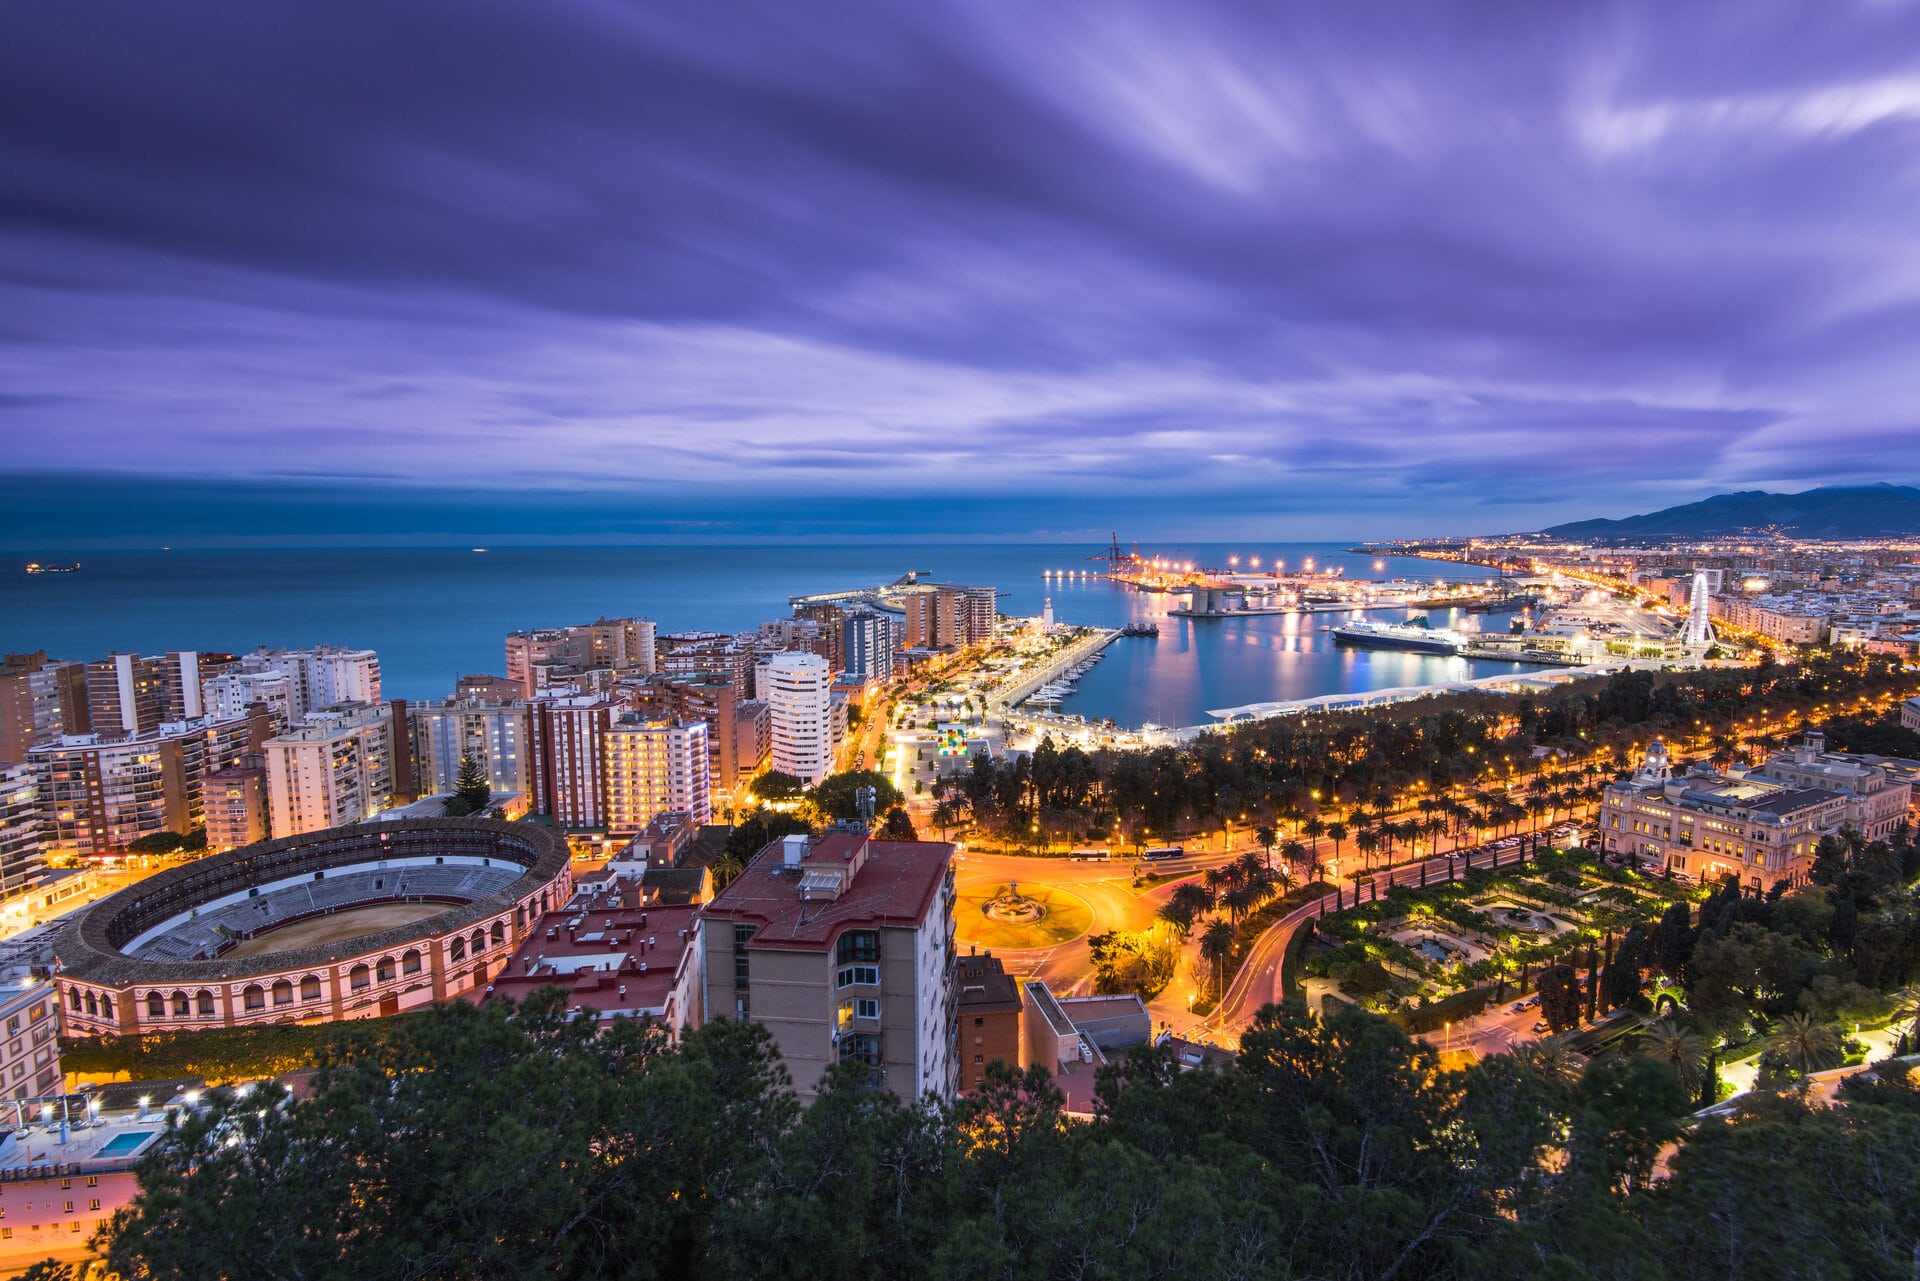 Malaga – the best of Andalusia